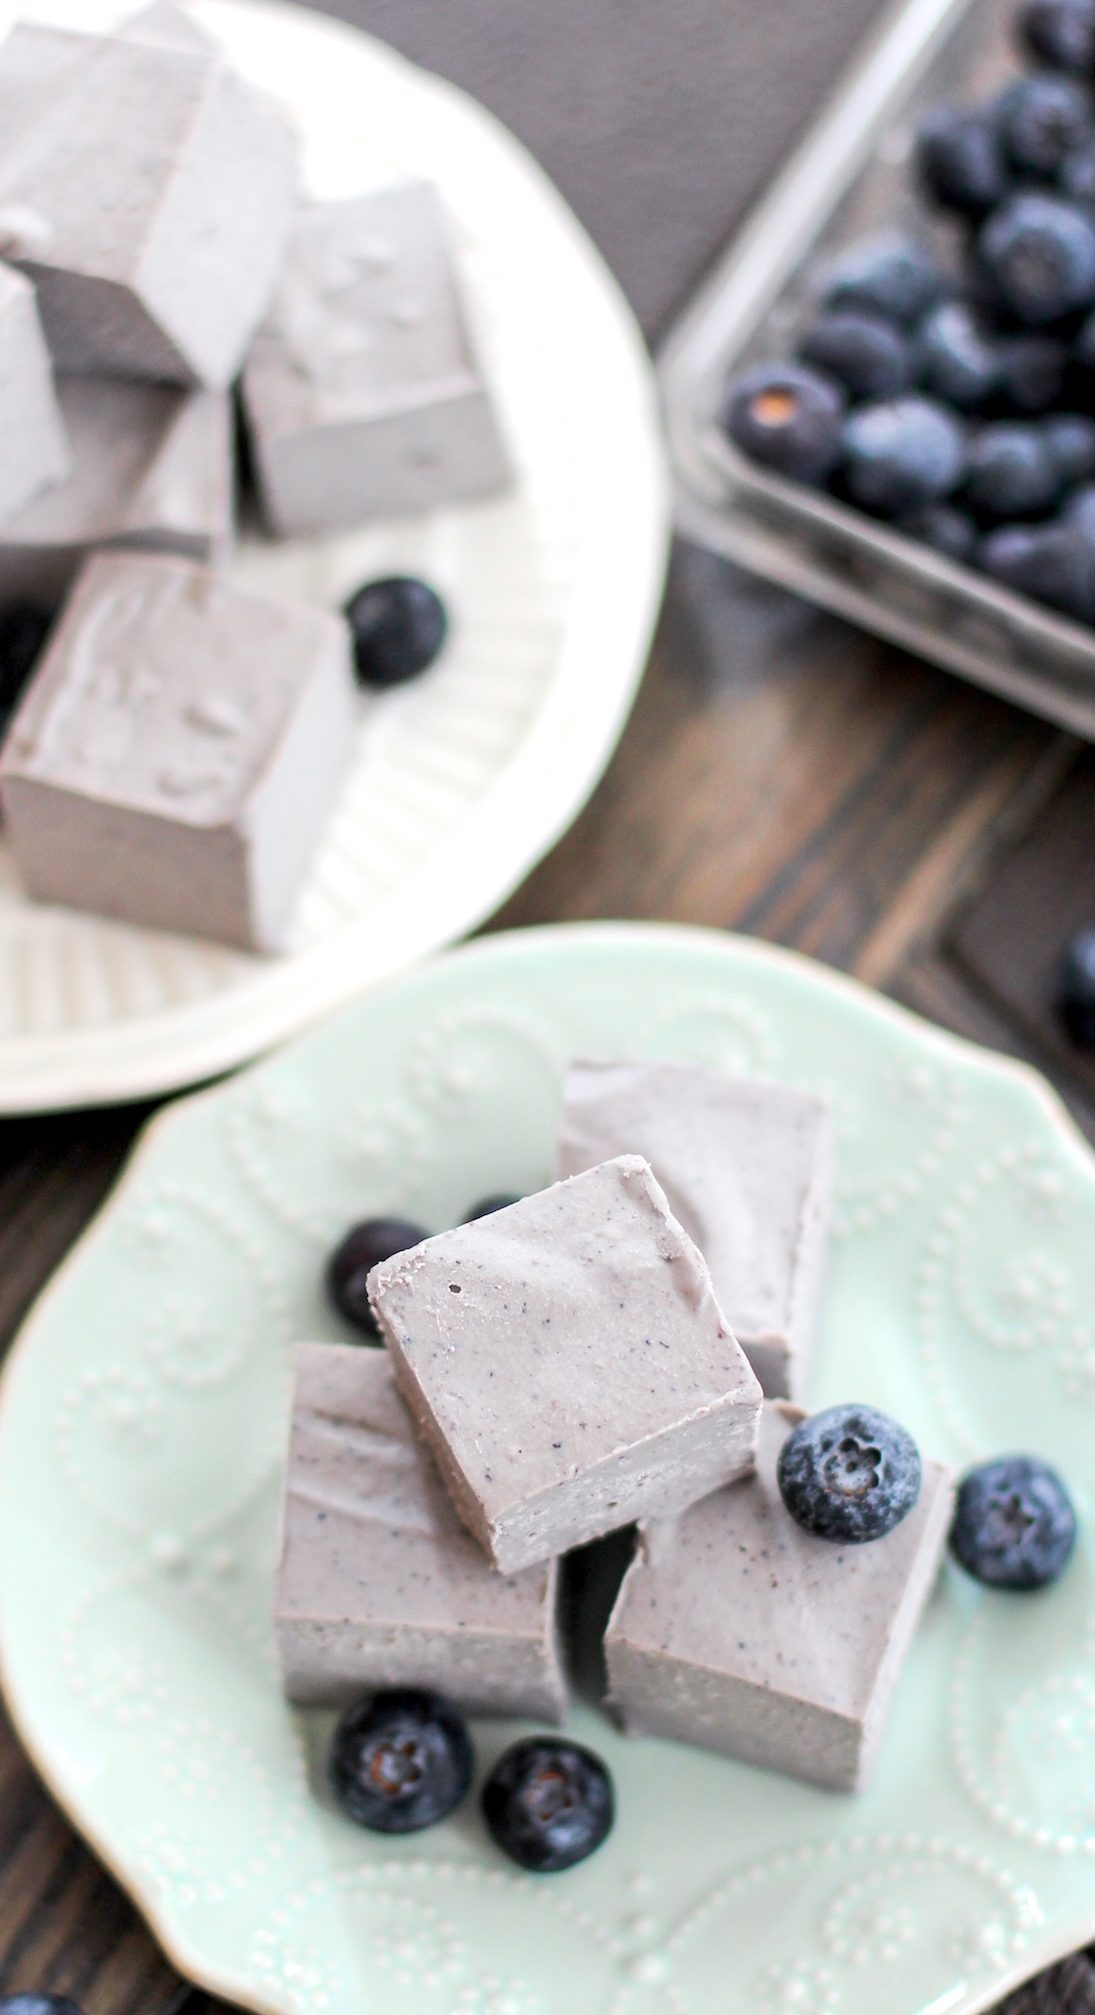 Healthy Raw Blueberry Coconut Fudge (refined sugar free, low carb, gluten free, vegan) - Healthy Dessert Recipes at Desserts with Benefits